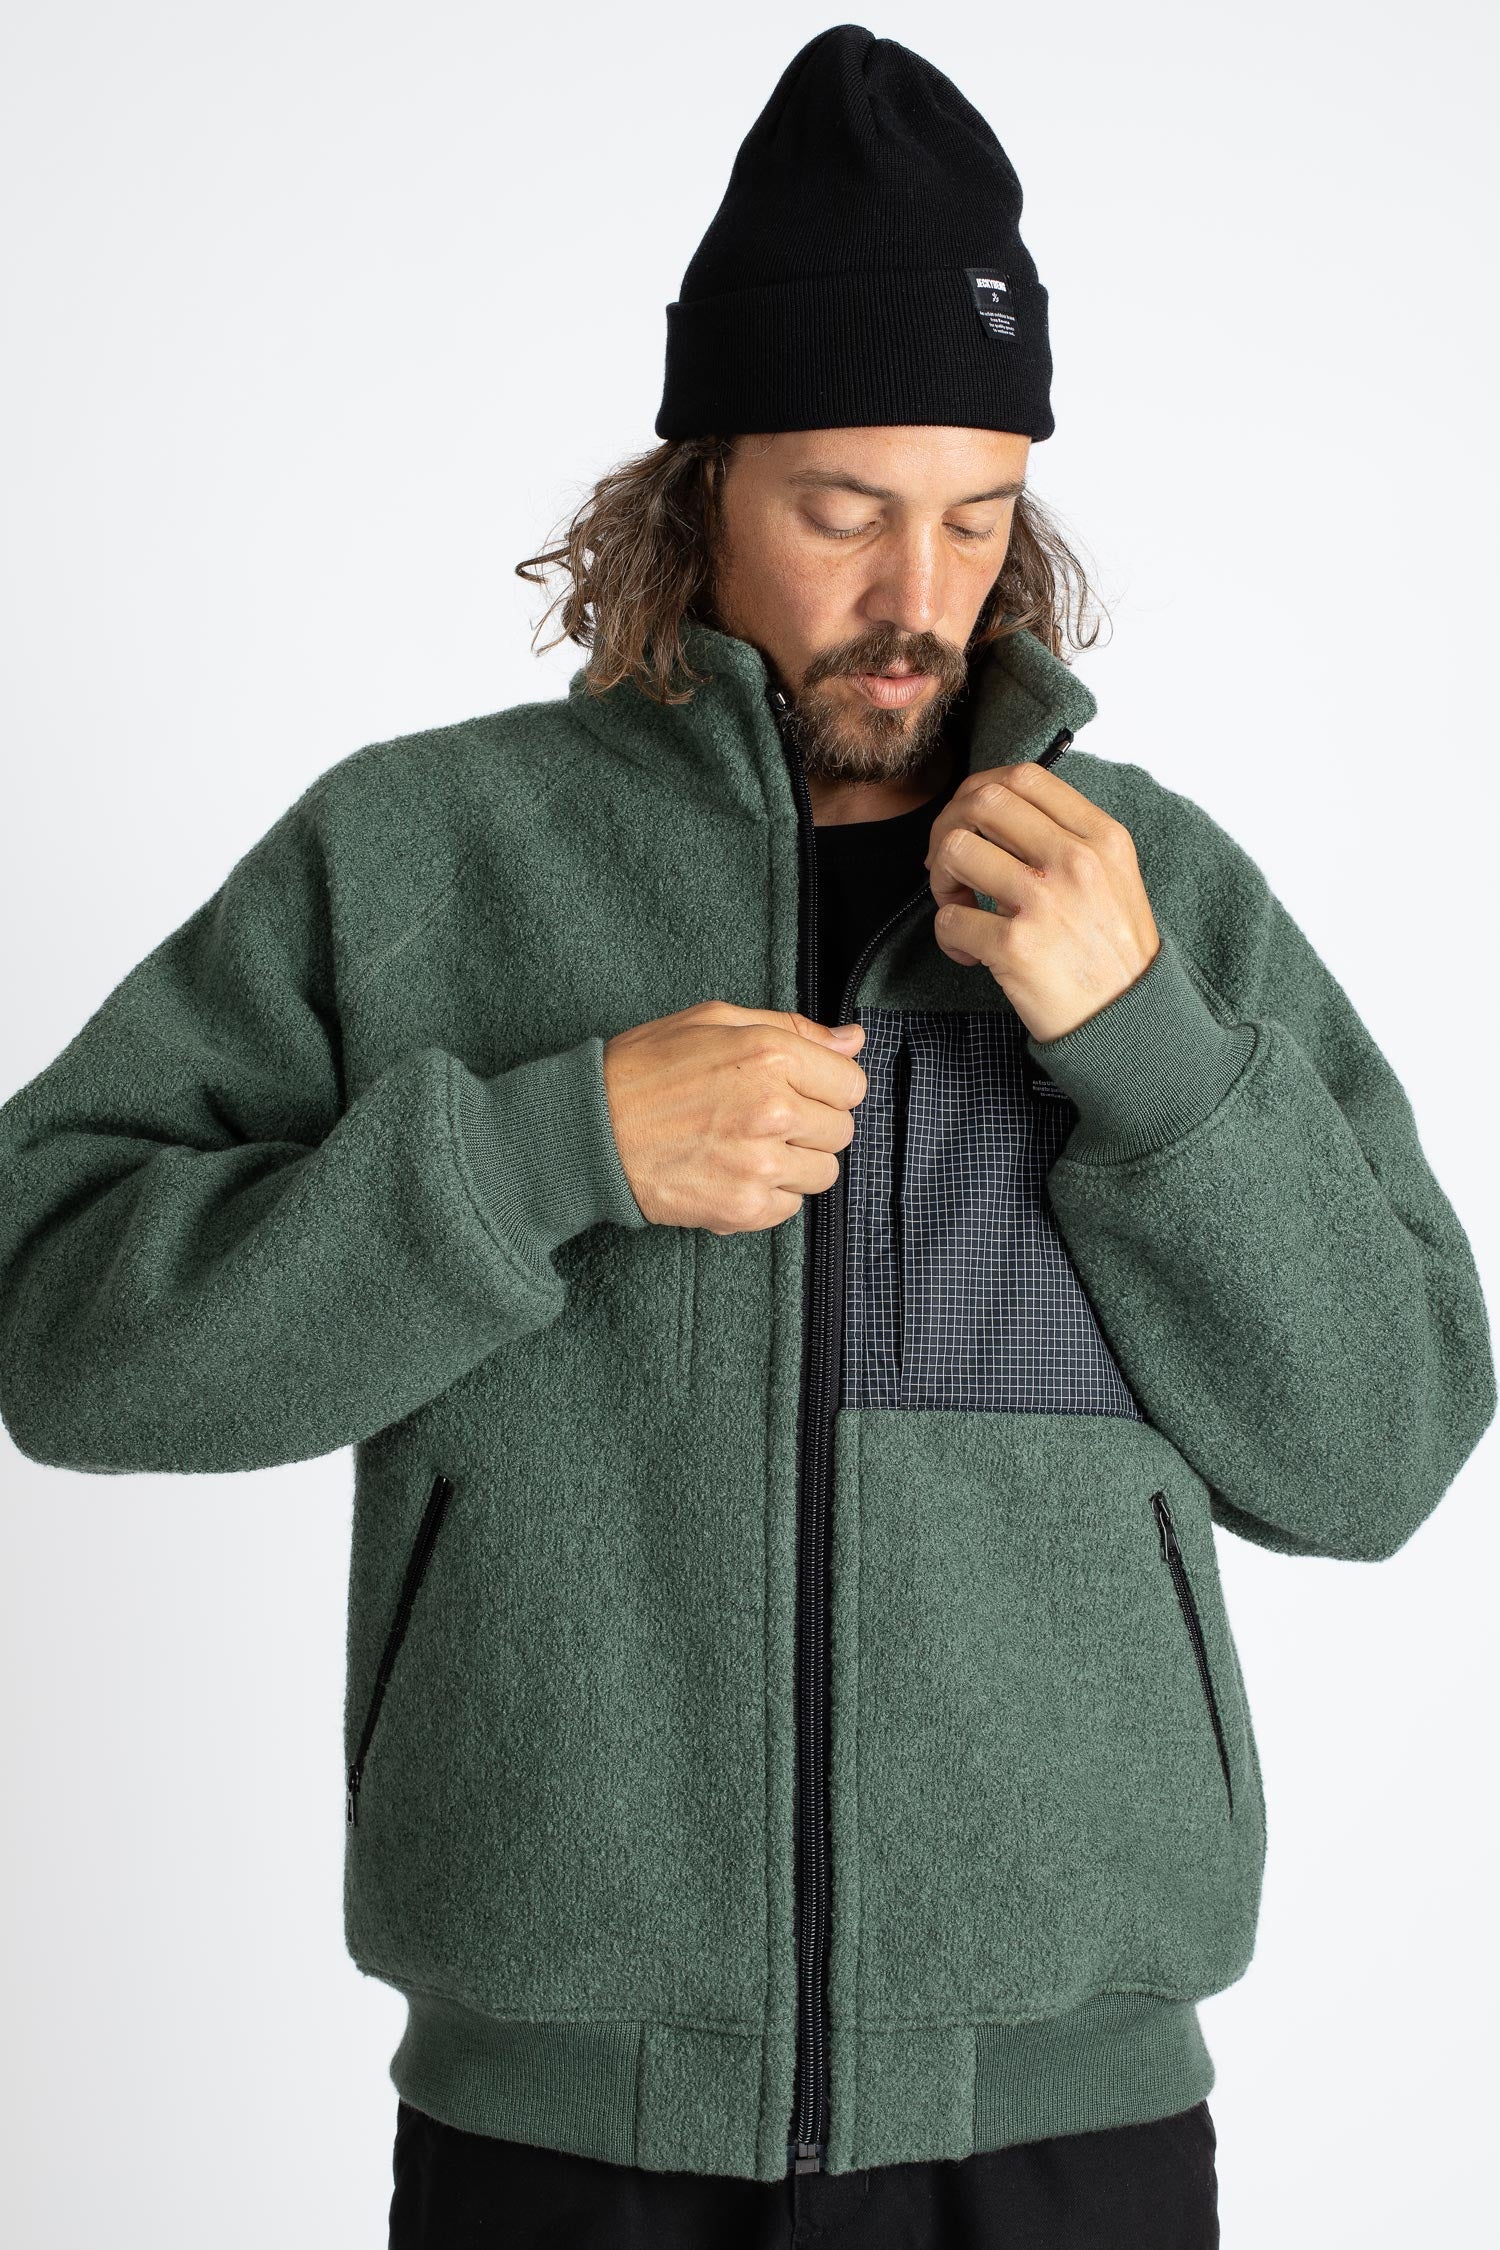 The NATURAL WOOLFLEECE JACKET - olive green